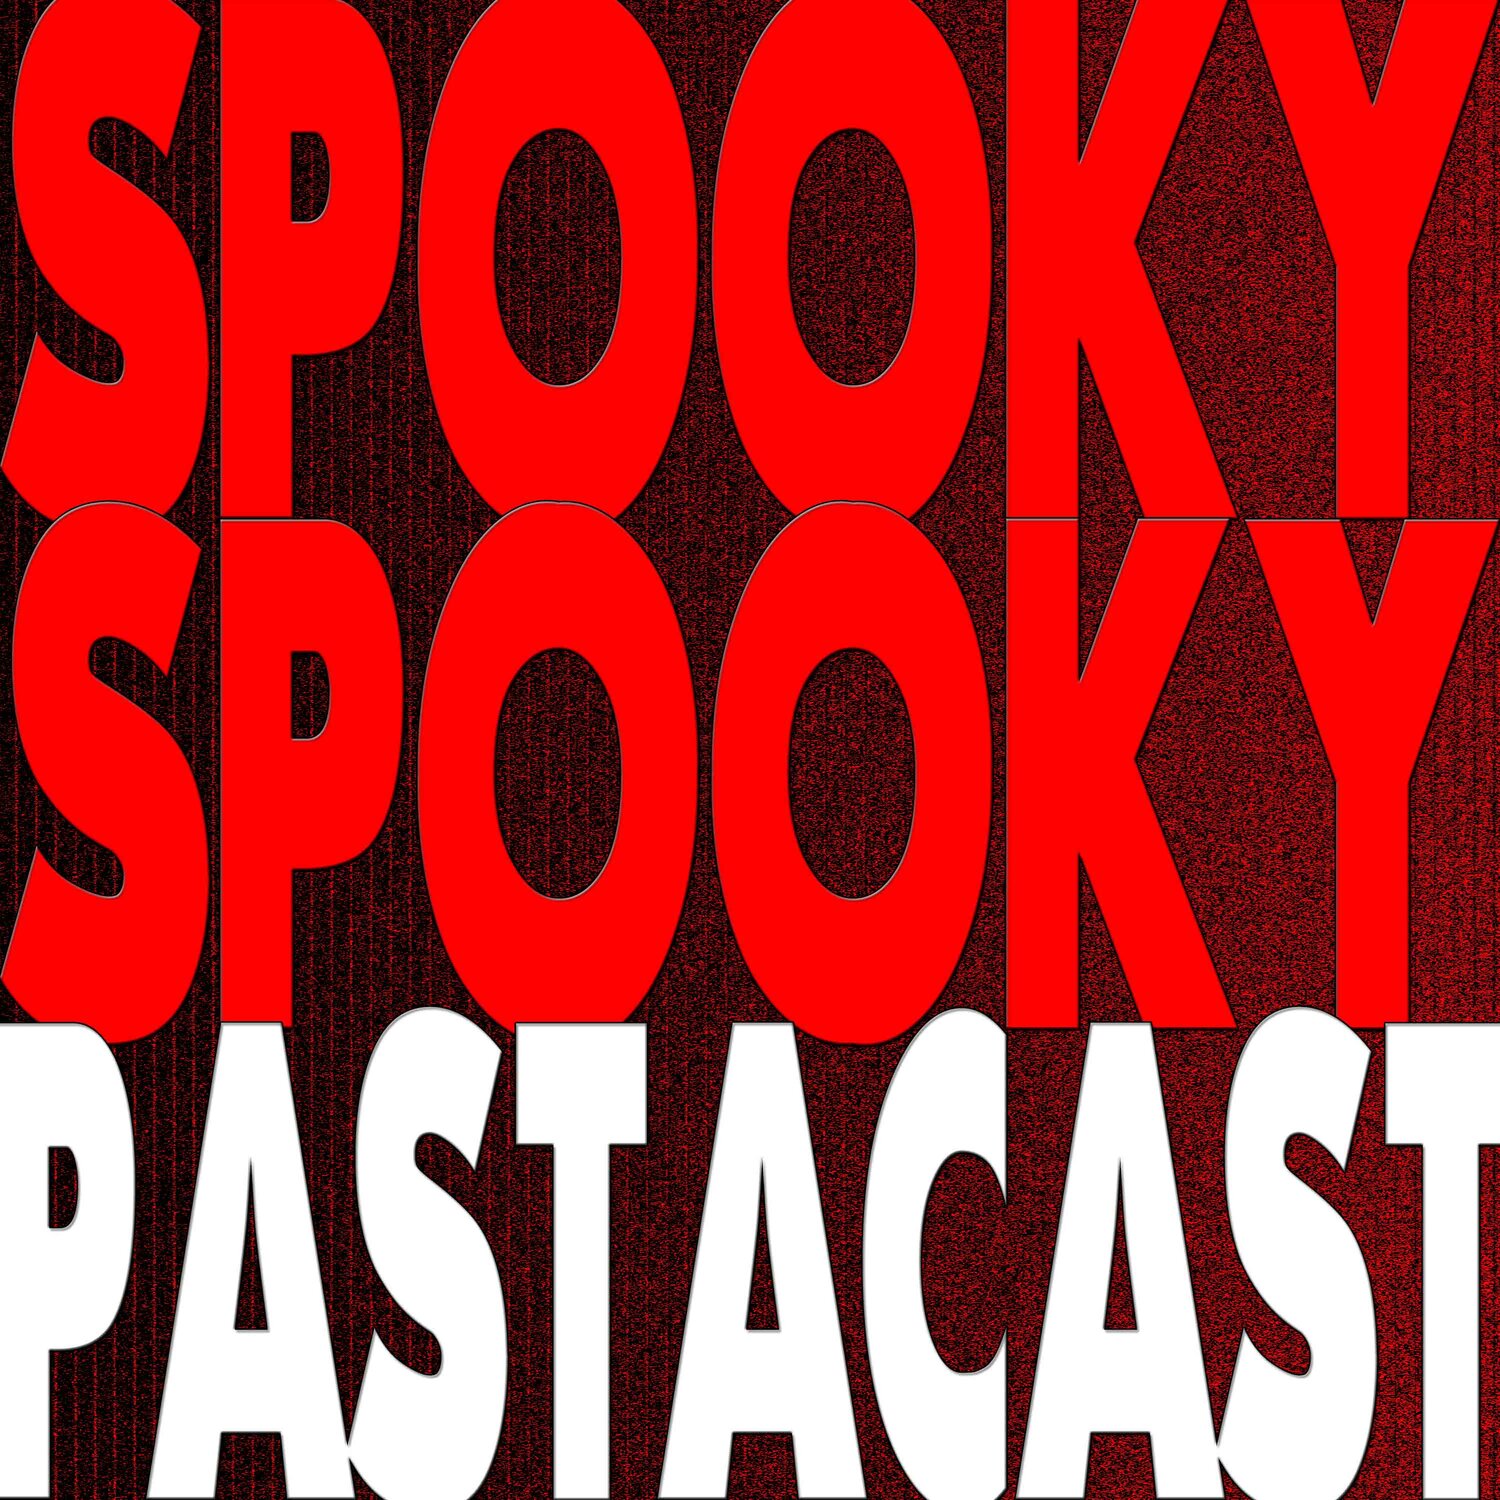 54: Spooky Spooky Pastacast - 2 - The Poo-Ghost Part 2